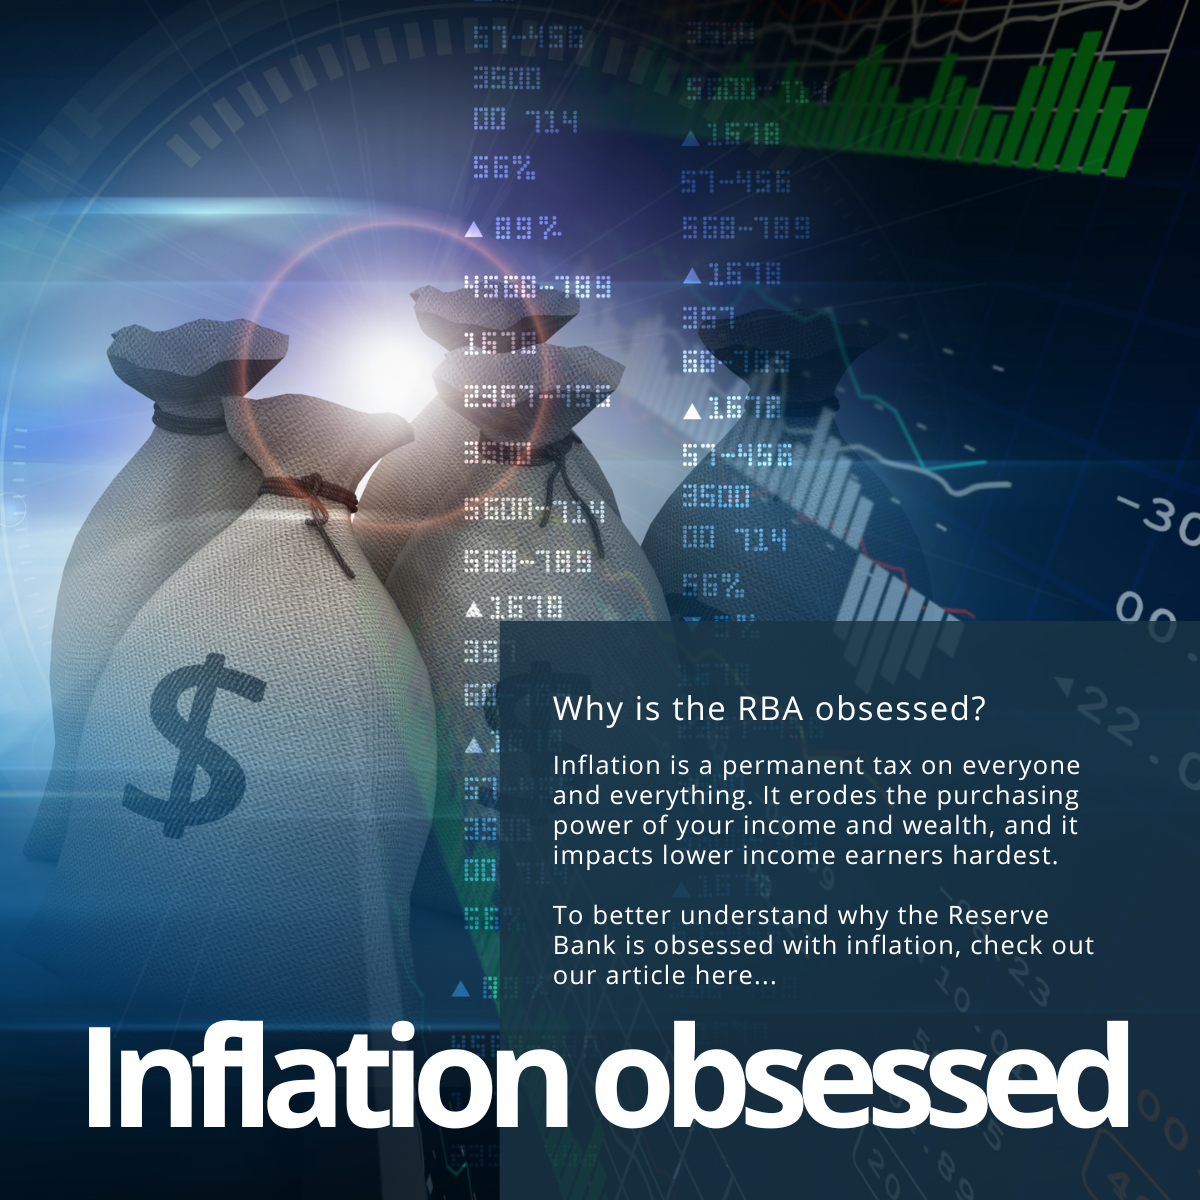 Why is the Reserve Bank obsessed with inflation?